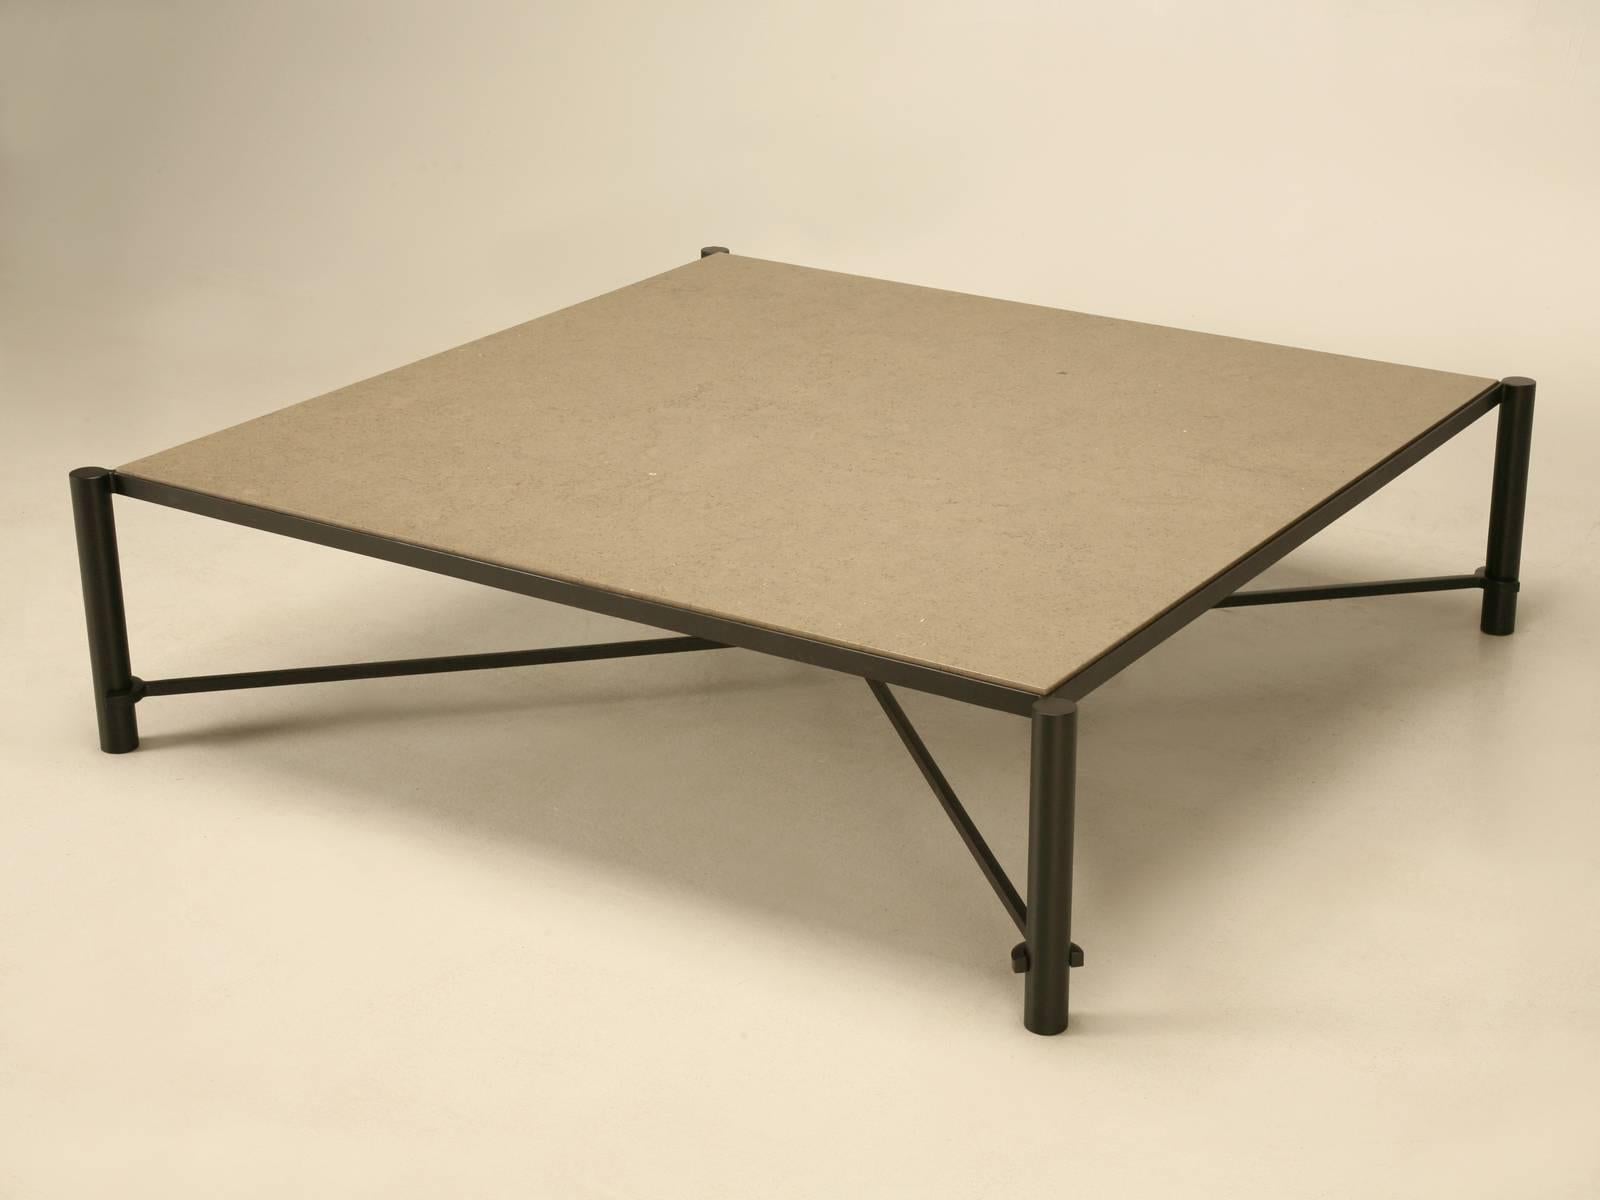 North American Mid-Century Modern Steel & Stone Coffee Table Custom Built to Order in Chicago  For Sale